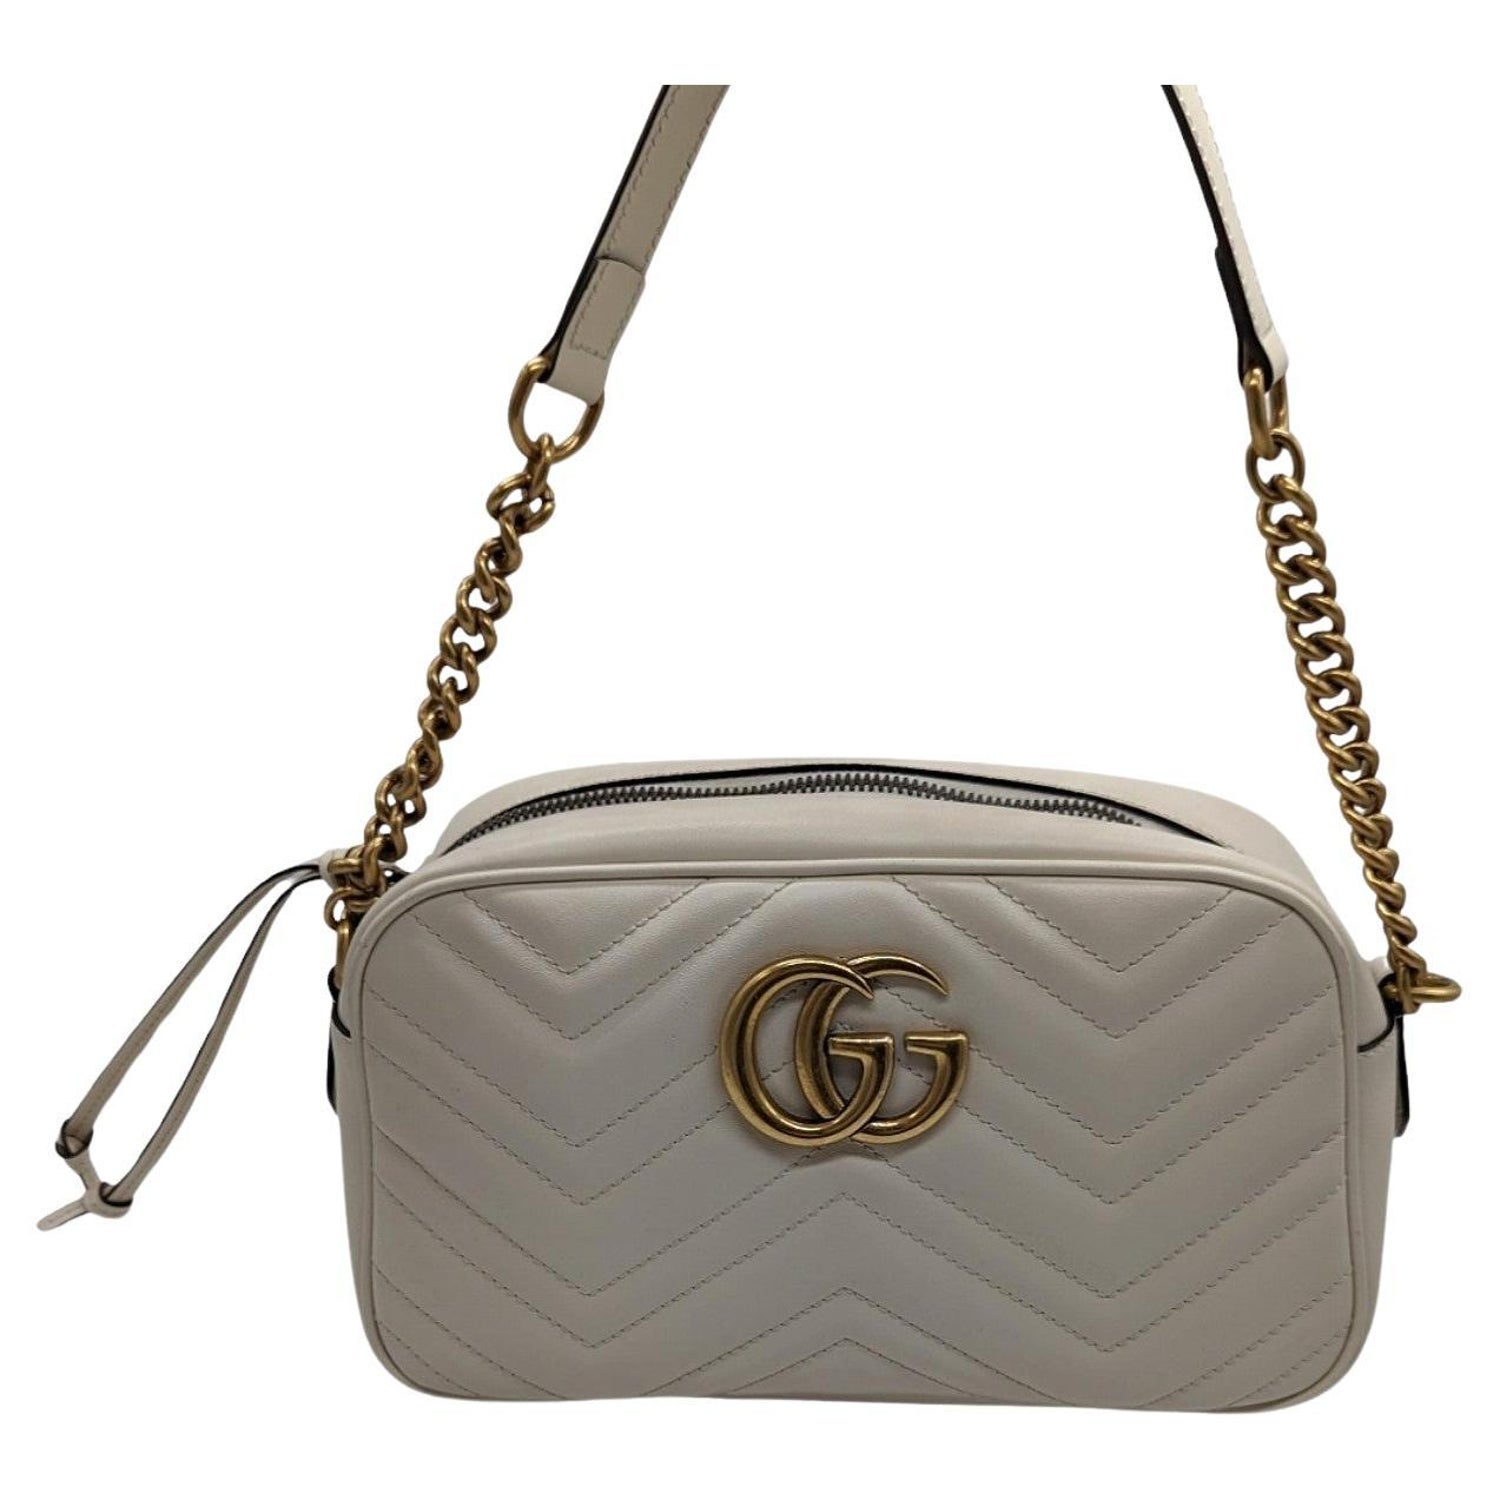 CHANEL Pre-Owned Timeless Shoulder Bag - Farfetch